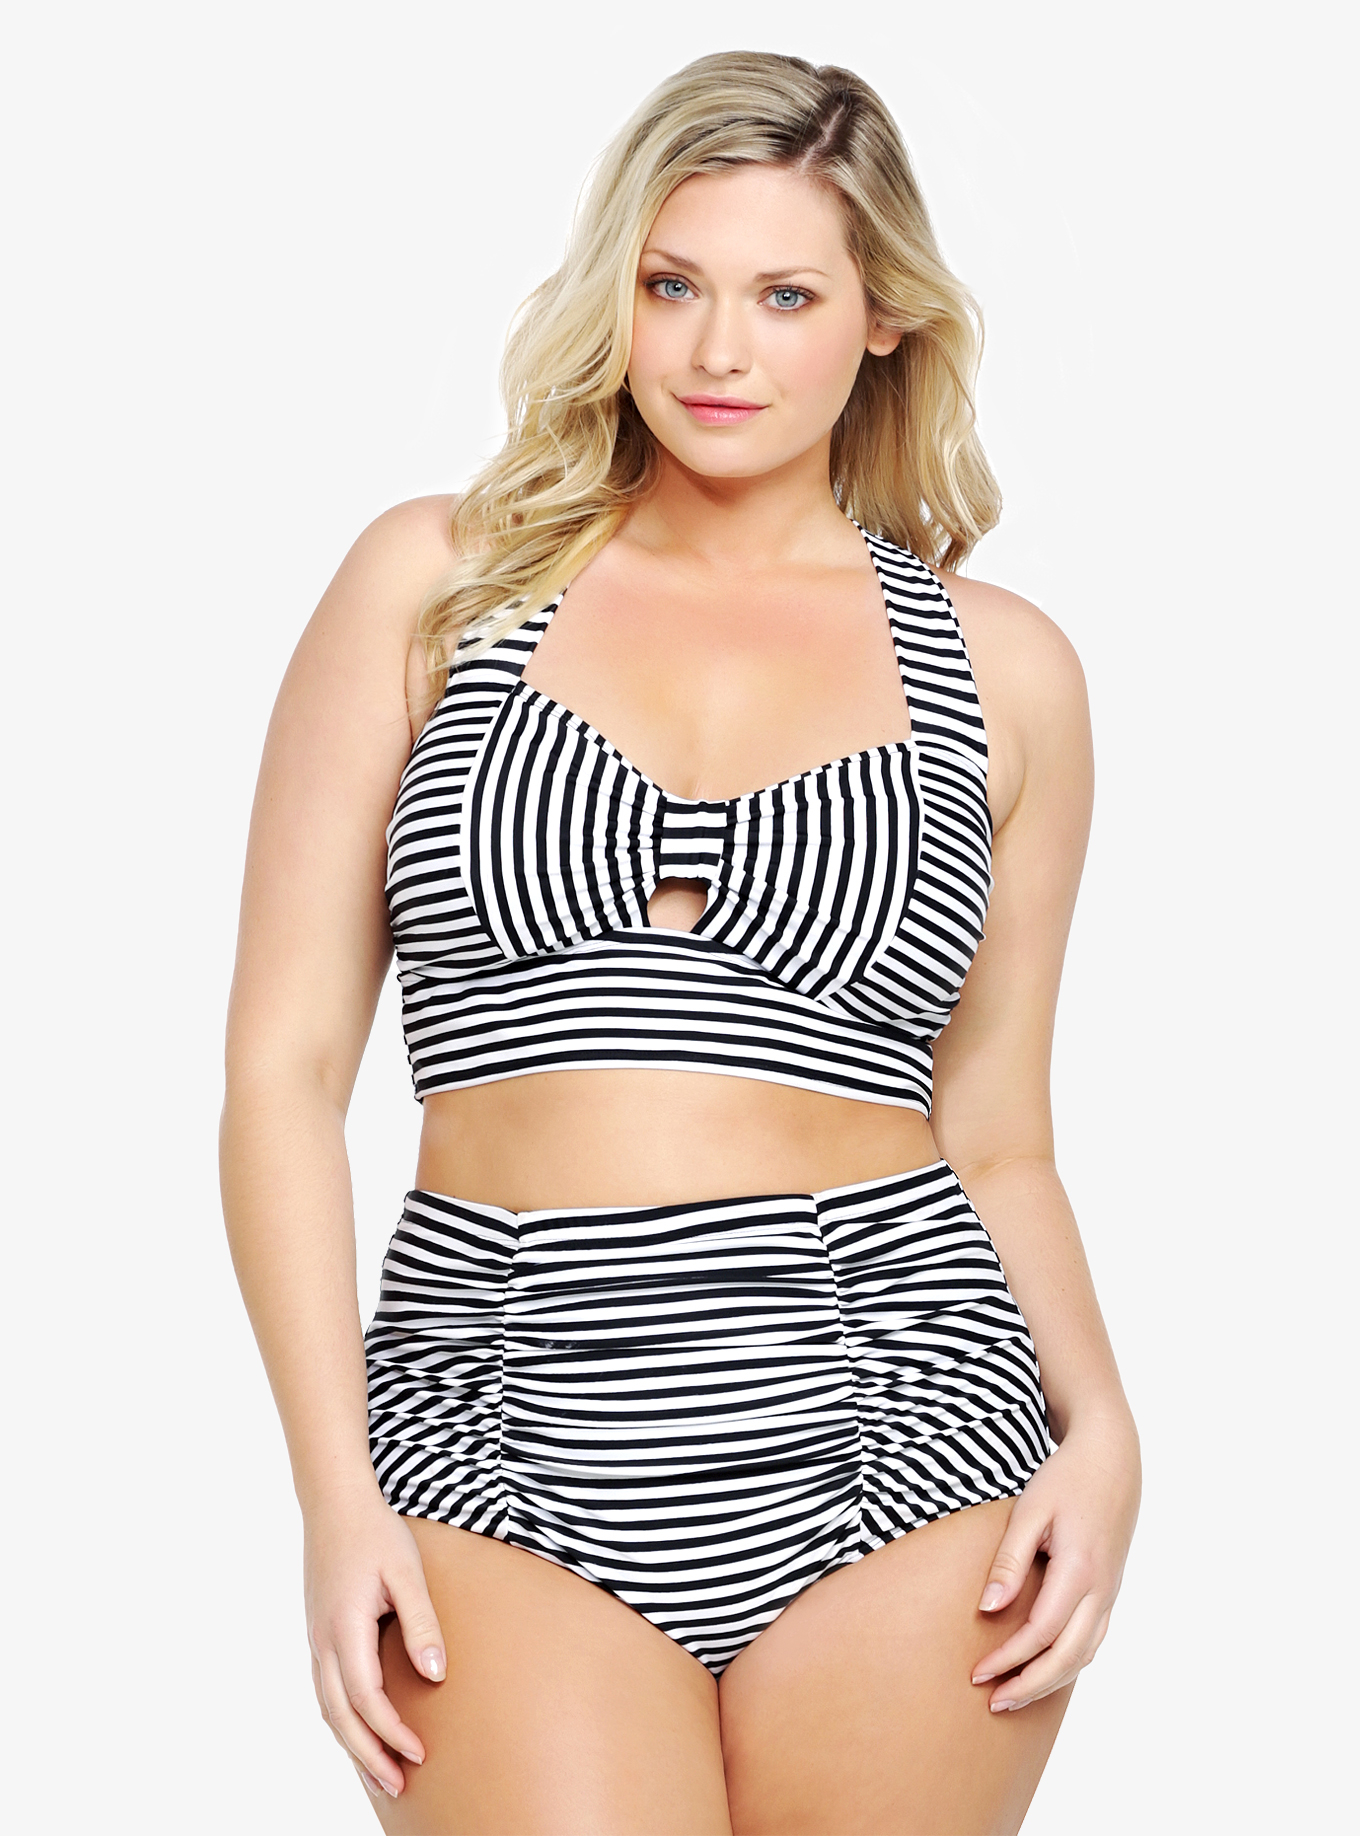 Style Watch: Summer Swimwear for Curves